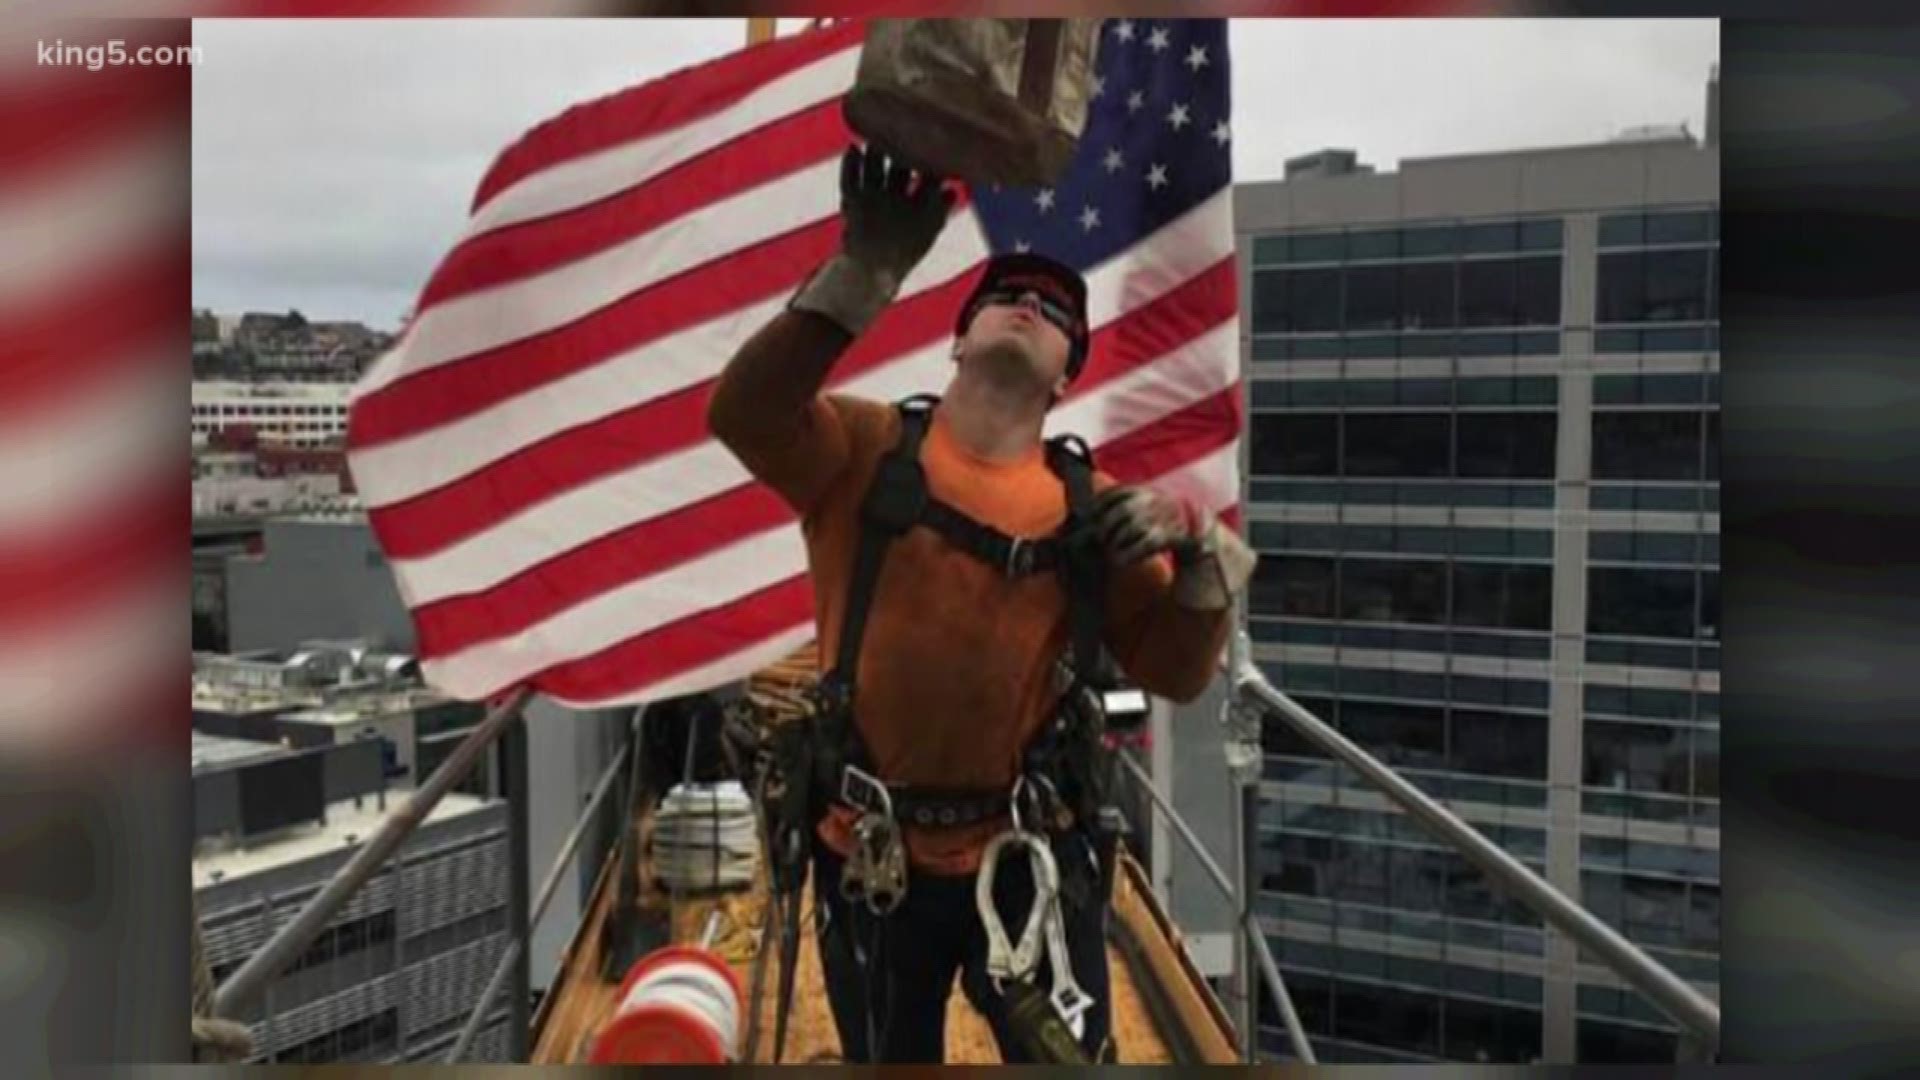 Two ironworkers, Travis Corbet, 33, and Andrew Yoder, 31, were killed when a crane collapsed in South Lake Union on Saturday.